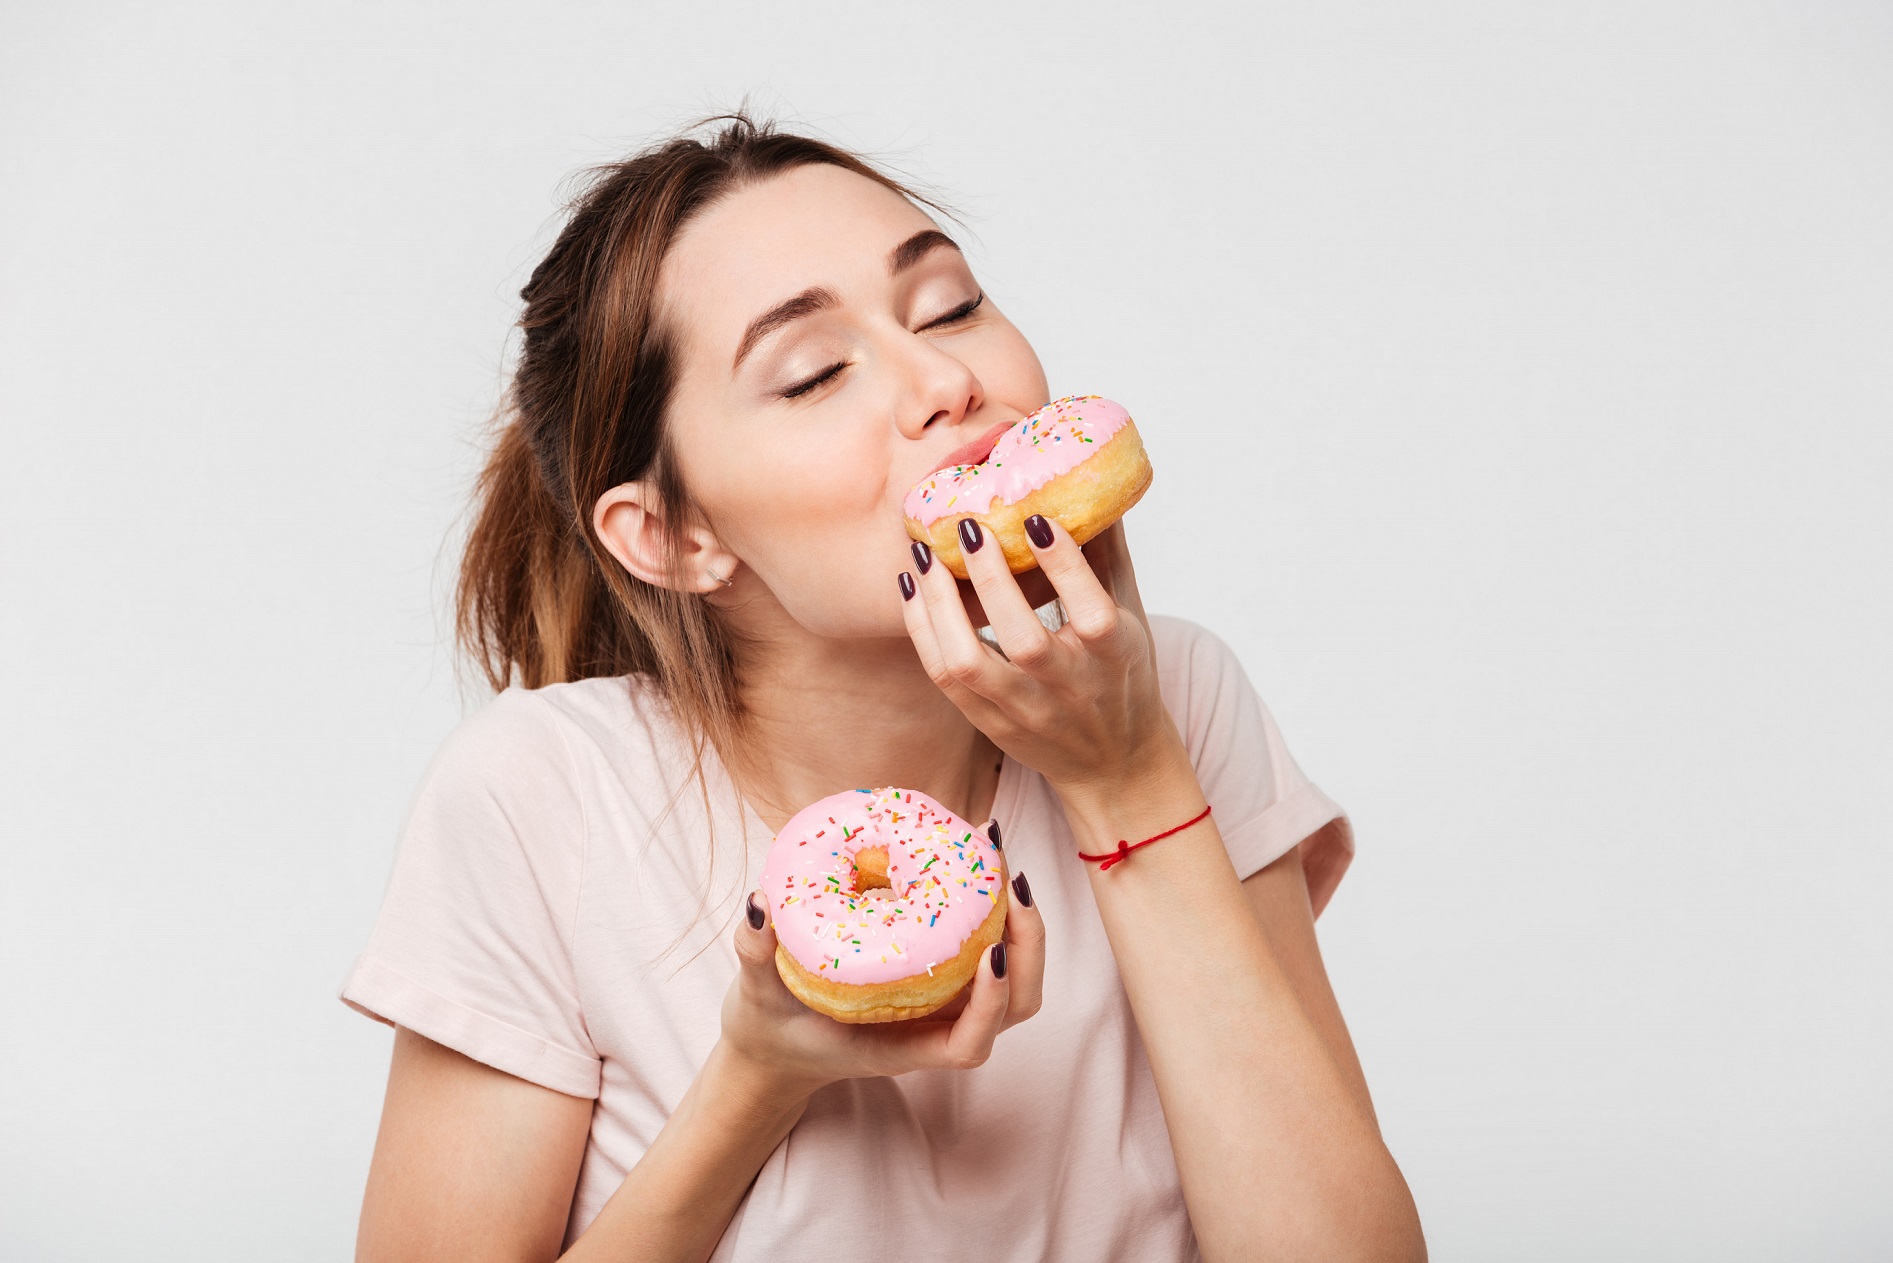 ELIMINATING DONUTS IN OUR DIETS